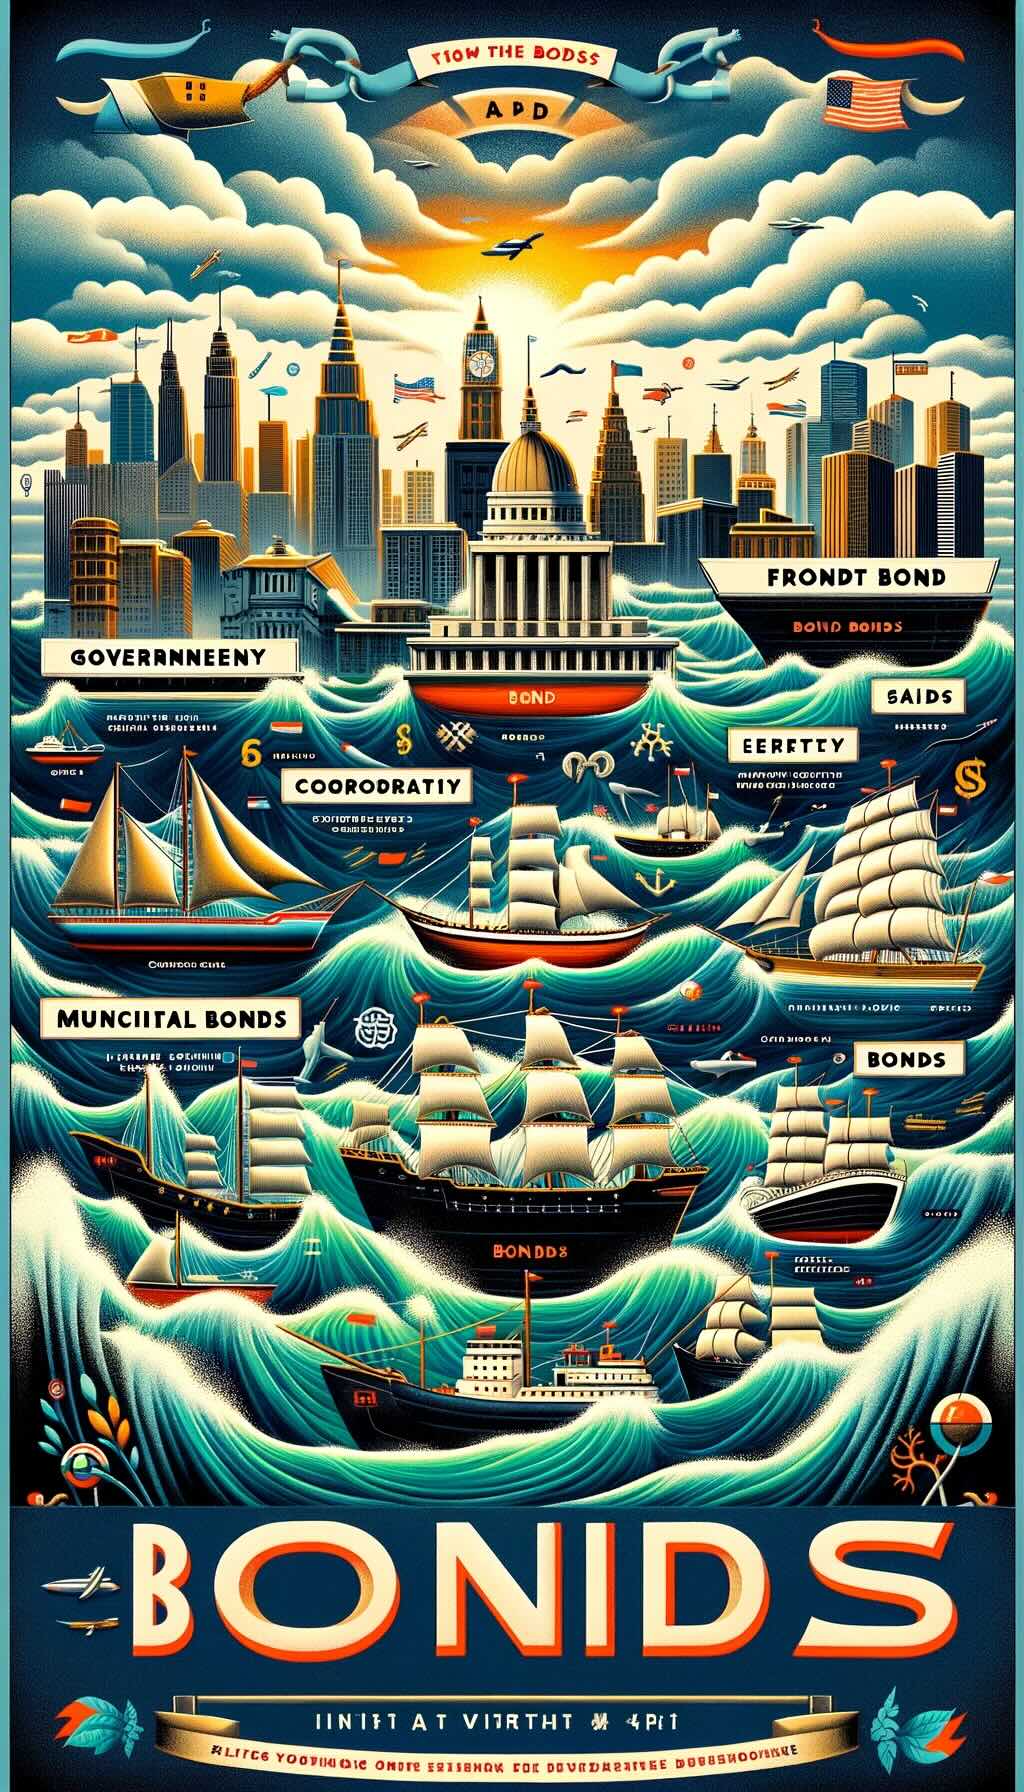 Navigates the diverse world of bonds through a maritime theme, where each bond type is represented as a unique ship on the vast financial seas. Government bonds are sturdy vessels, symbolizing their low-risk nature and government backing. Municipal bonds are depicted as community ships, reflecting their role in funding local projects and offering tax-exempt interest. Corporate bonds, with their sleek designs, denote the higher returns they promise alongside increased risk. Agency bonds, as semi-governmental vessels, offer a balance between safety and risk. Foreign bonds stand out as exotic ships, sailing international waters to illustrate the diversification they bring to an investment portfolio. The sea teems with symbols of the financial market, portraying the dynamic environment these bonds navigate, highlighting the rich tapestry of investment opportunities each bond type presents within a diversified portfolio.